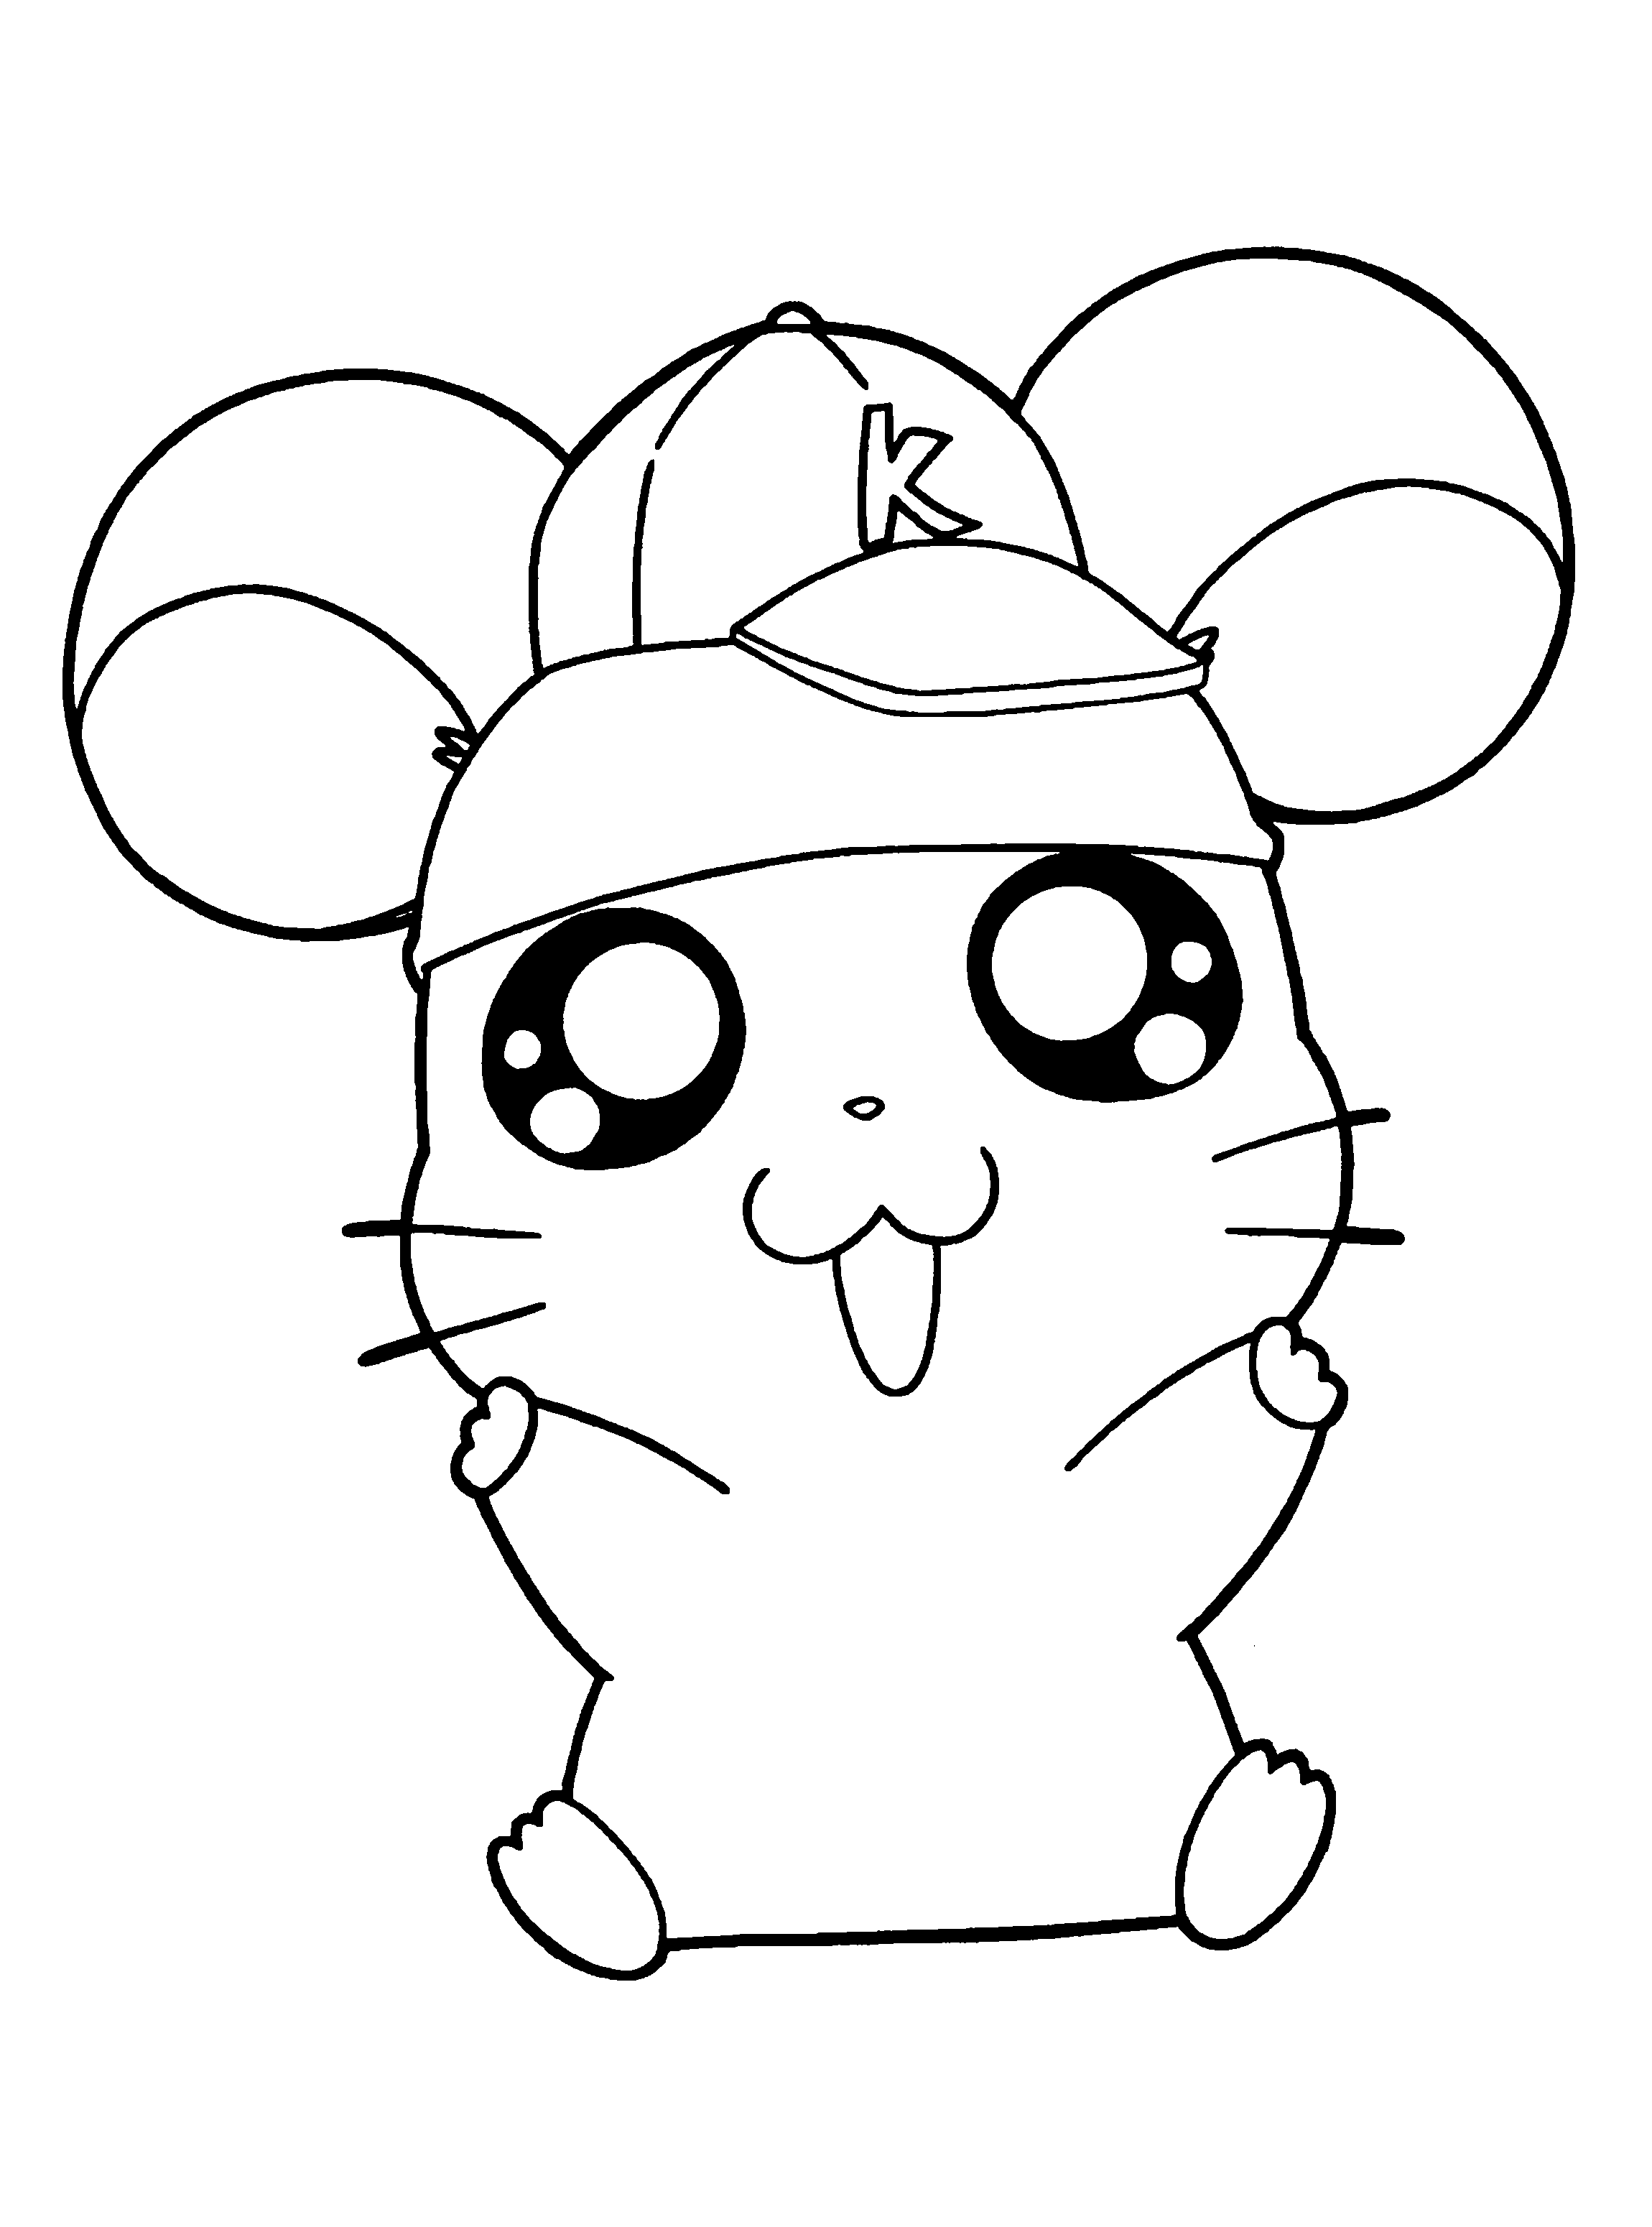 Coloring Page Hamtaro Coloring Pages 41 Animal Coloring Pages Halloween Coloring Page